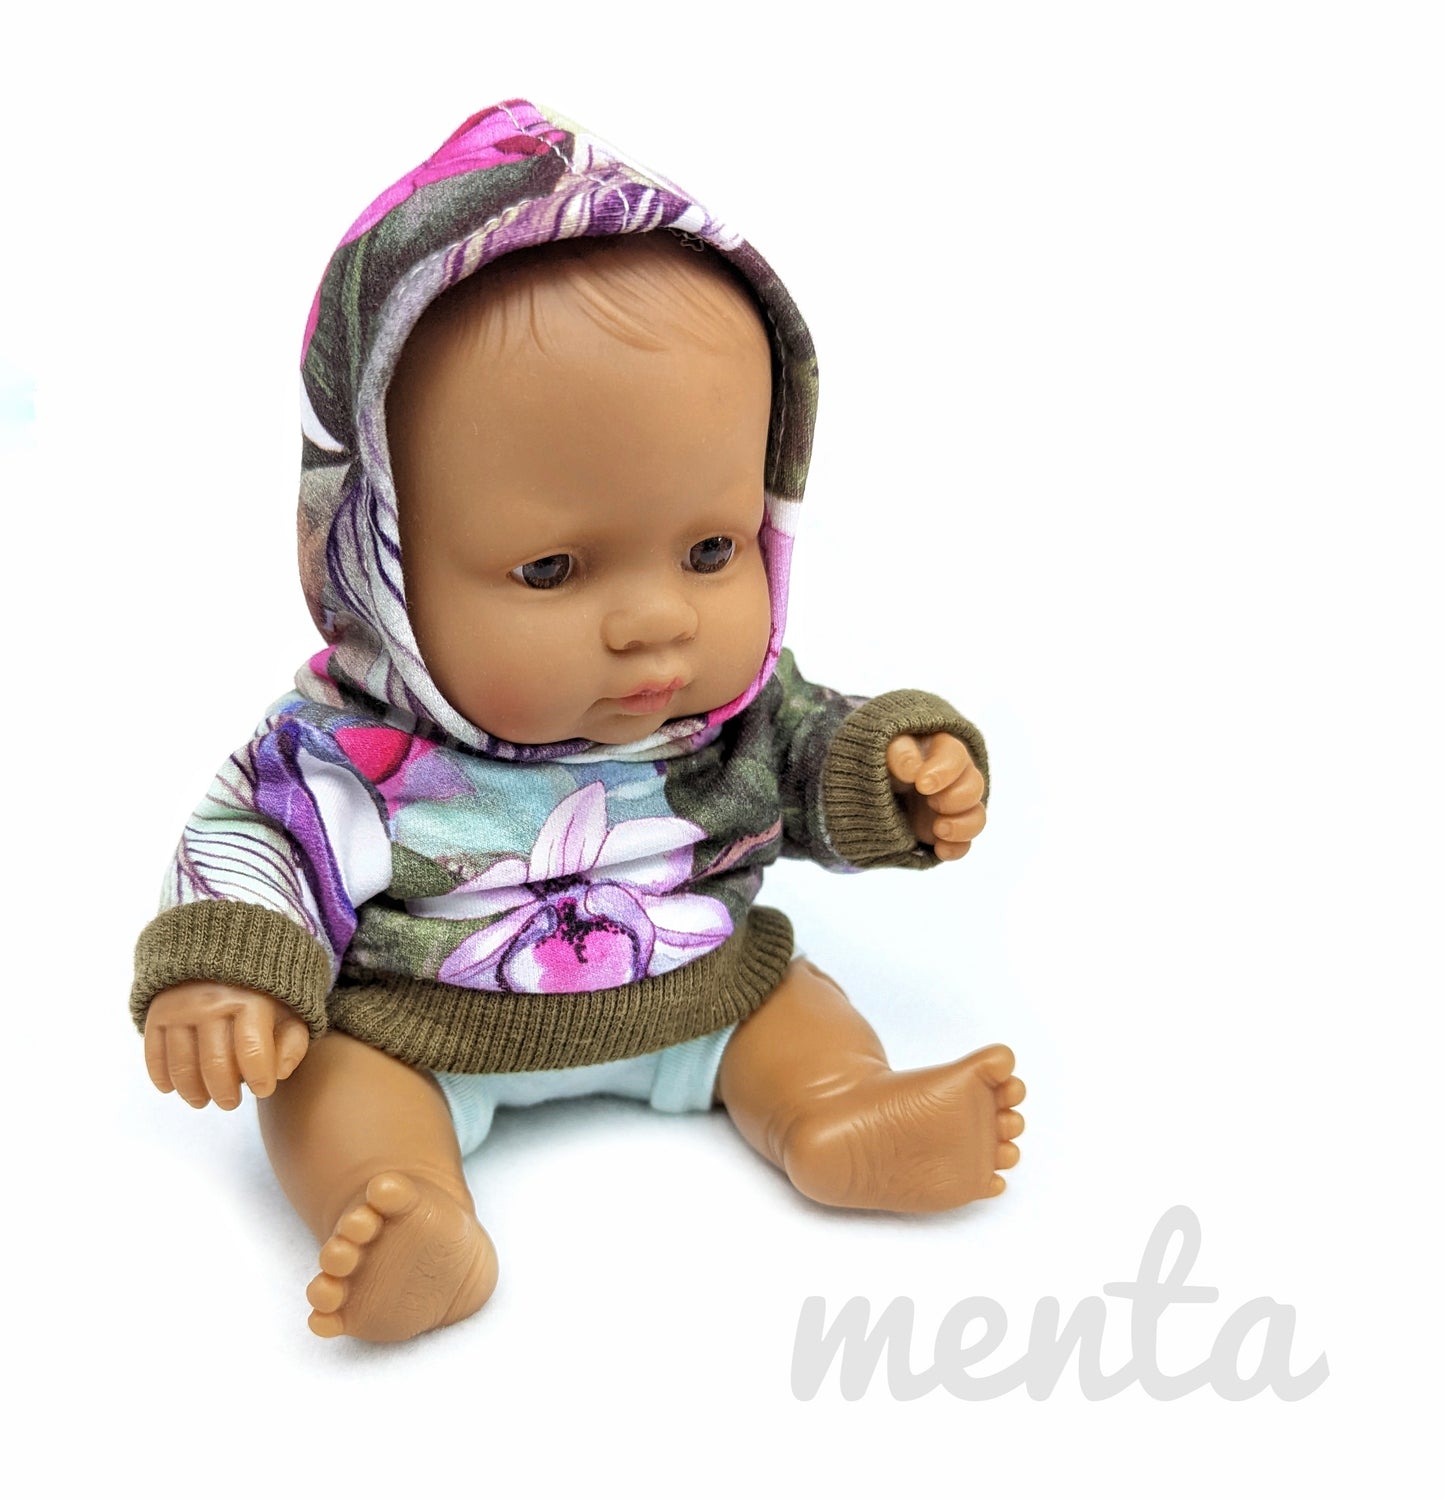 Sweater and Hoodies 8" Doll